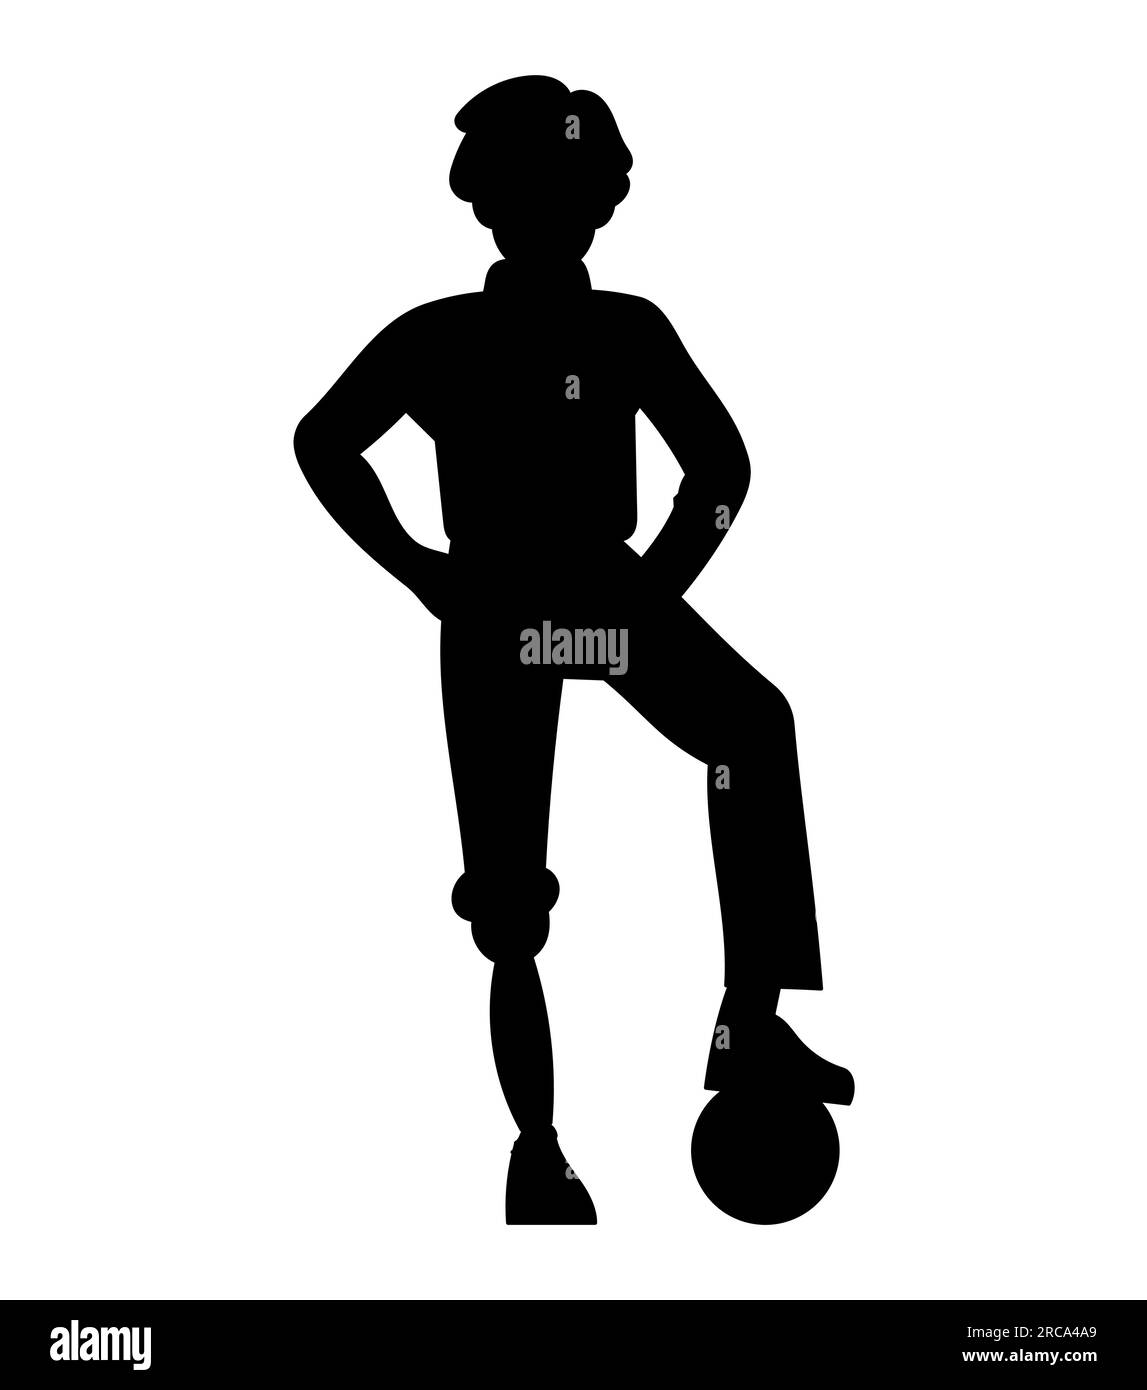 Black silhouette of a male football player, men's sports, a male figure standing with his foot on a ball, vector illustration isolated on white Stock Vector